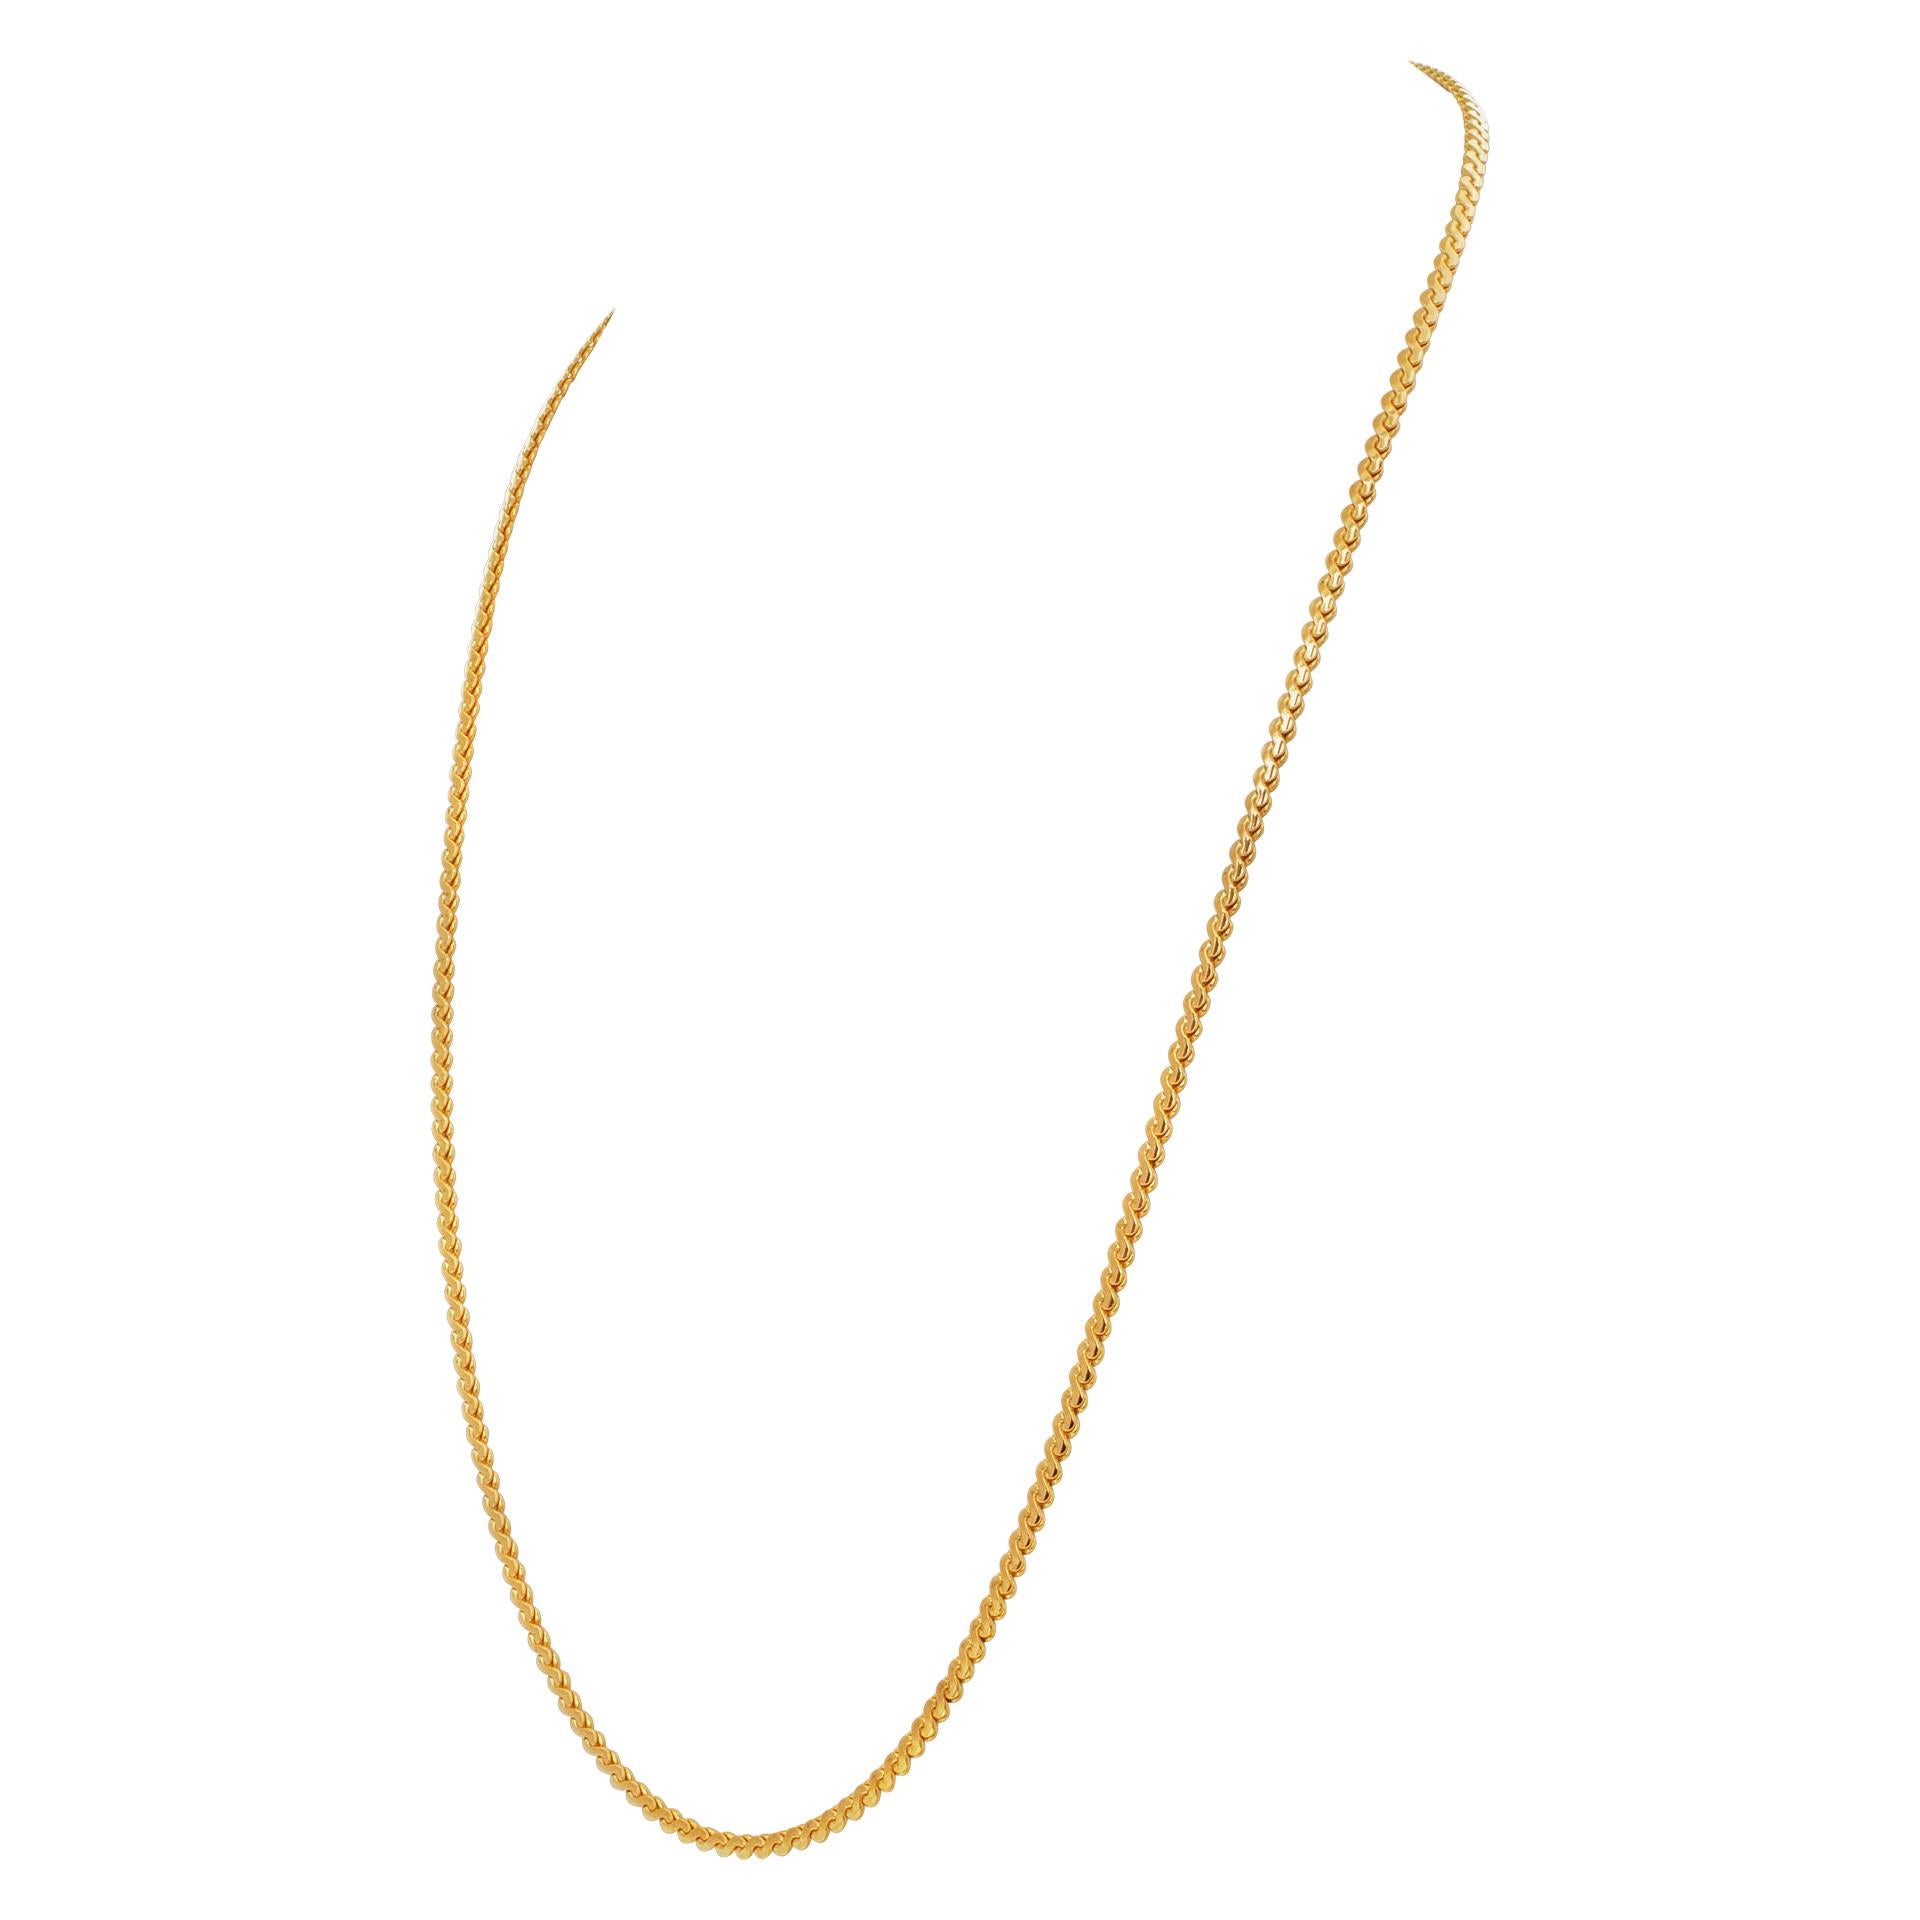 Curb link neklace in 14k yellow gold. Mecklace length: 23